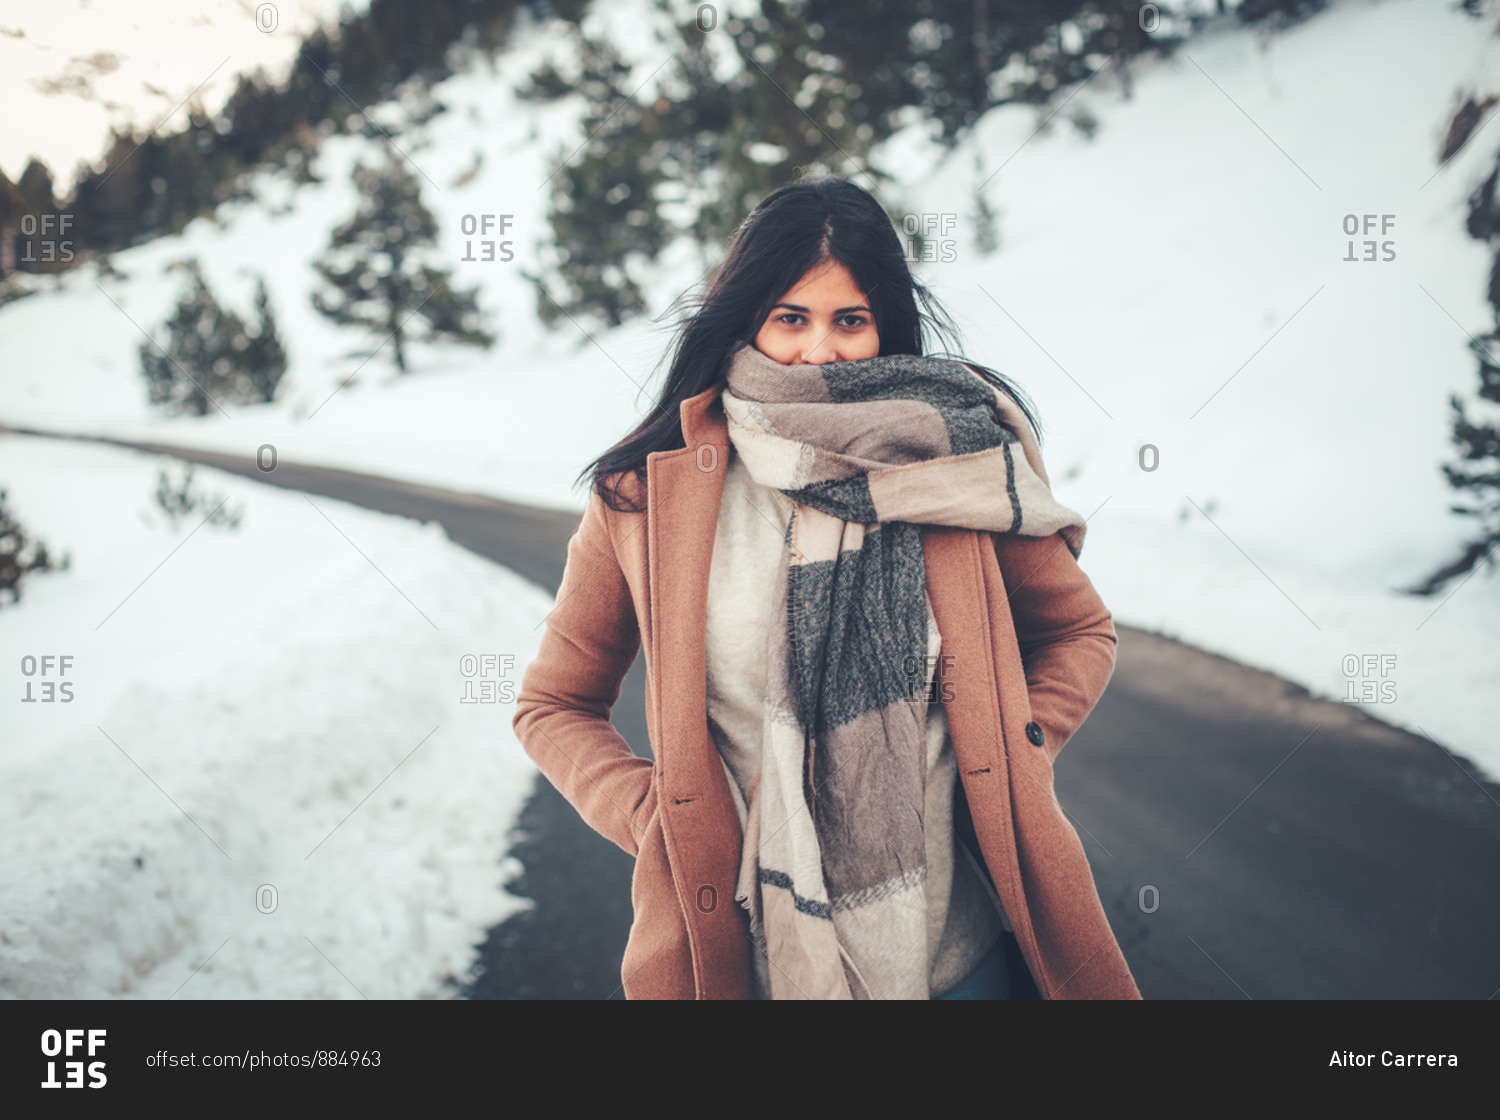 Young woman with dark hair bundled in thick scarf on rural road in winter